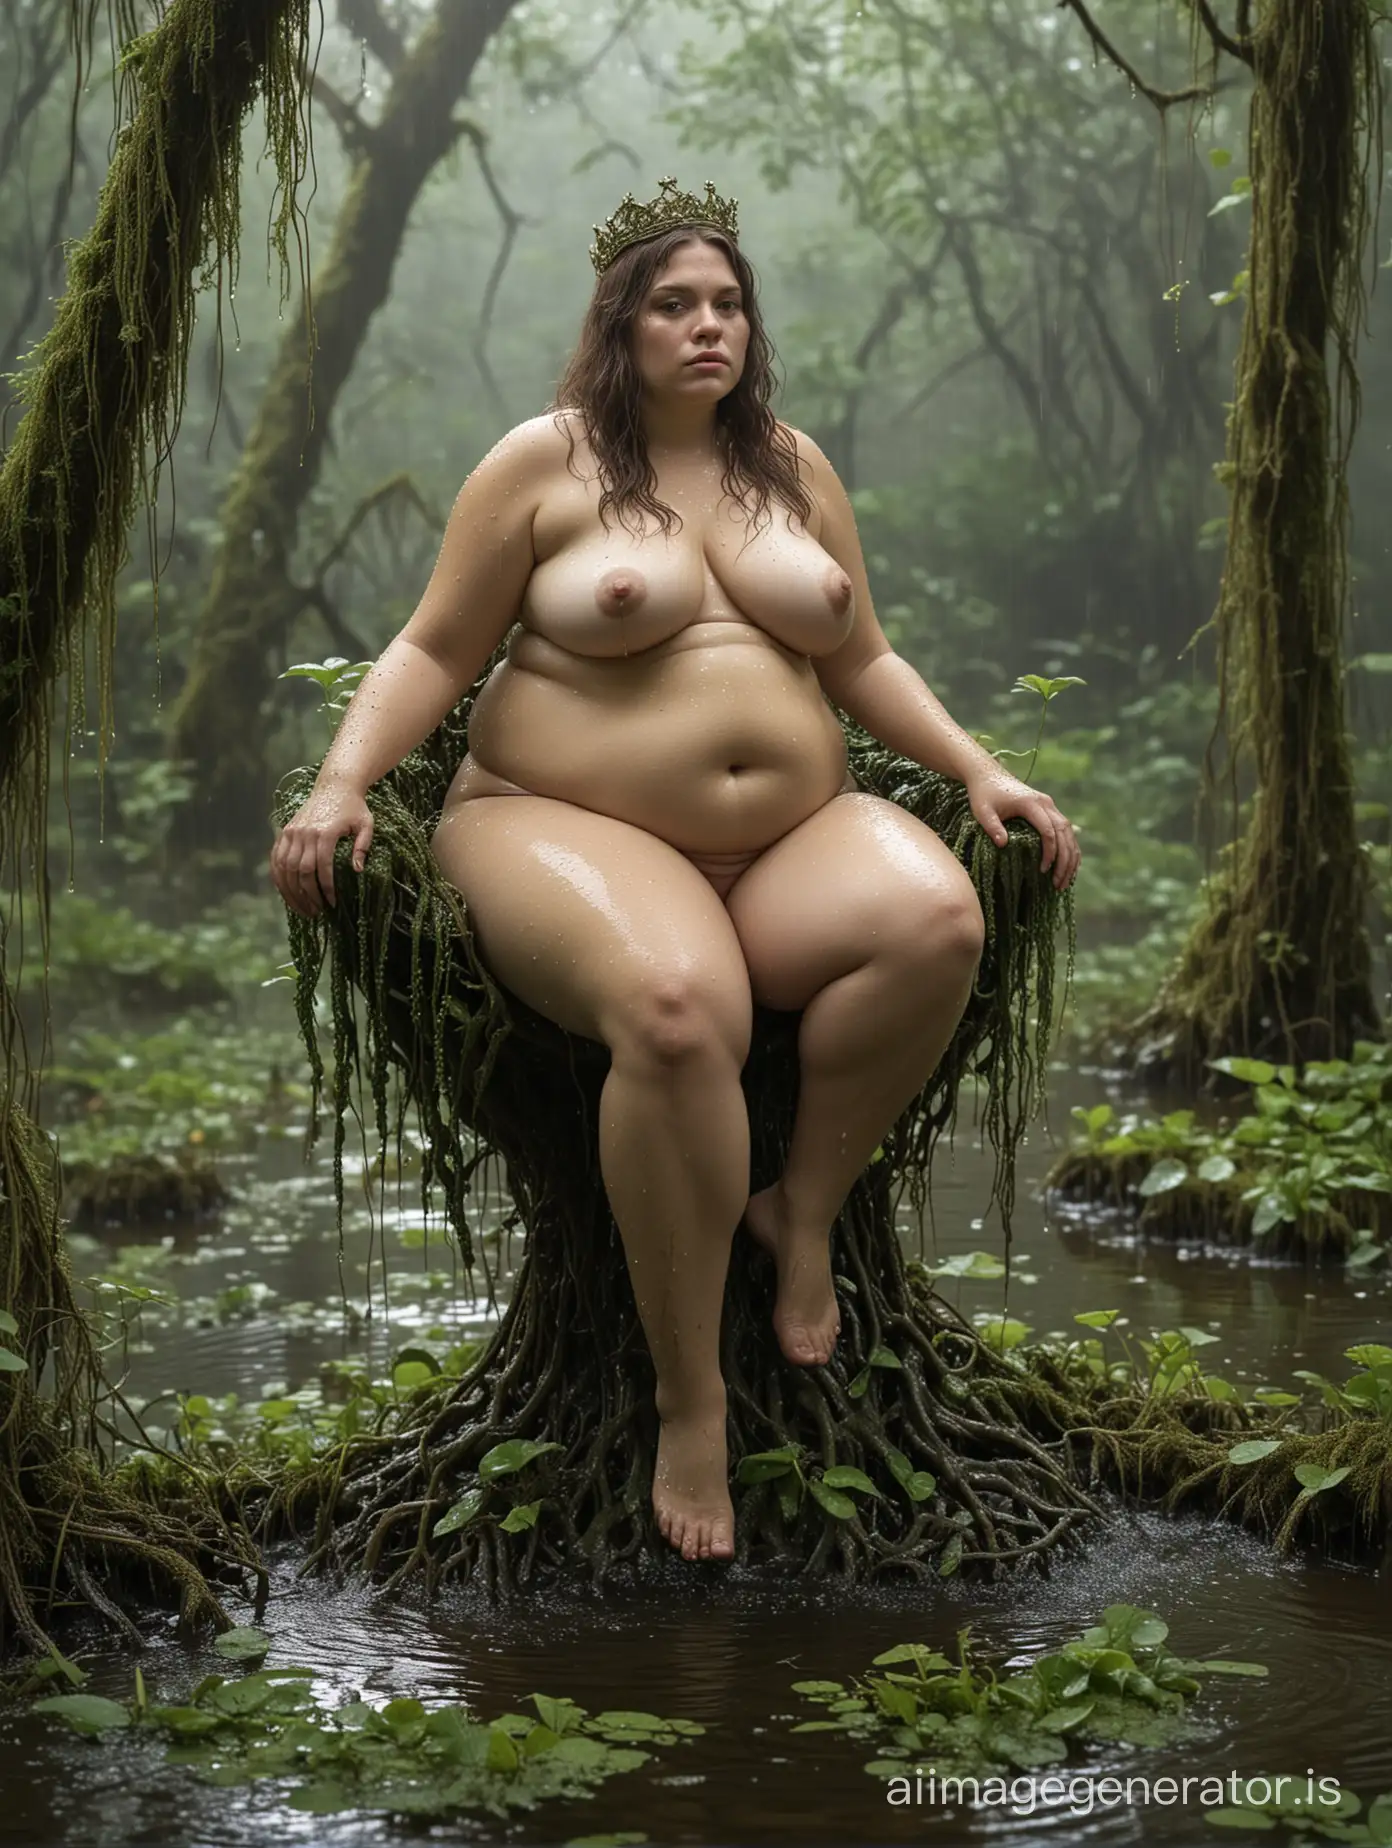 Frog-Queen-Reigns-Supreme-in-Swamp-Throne-Amid-Rain